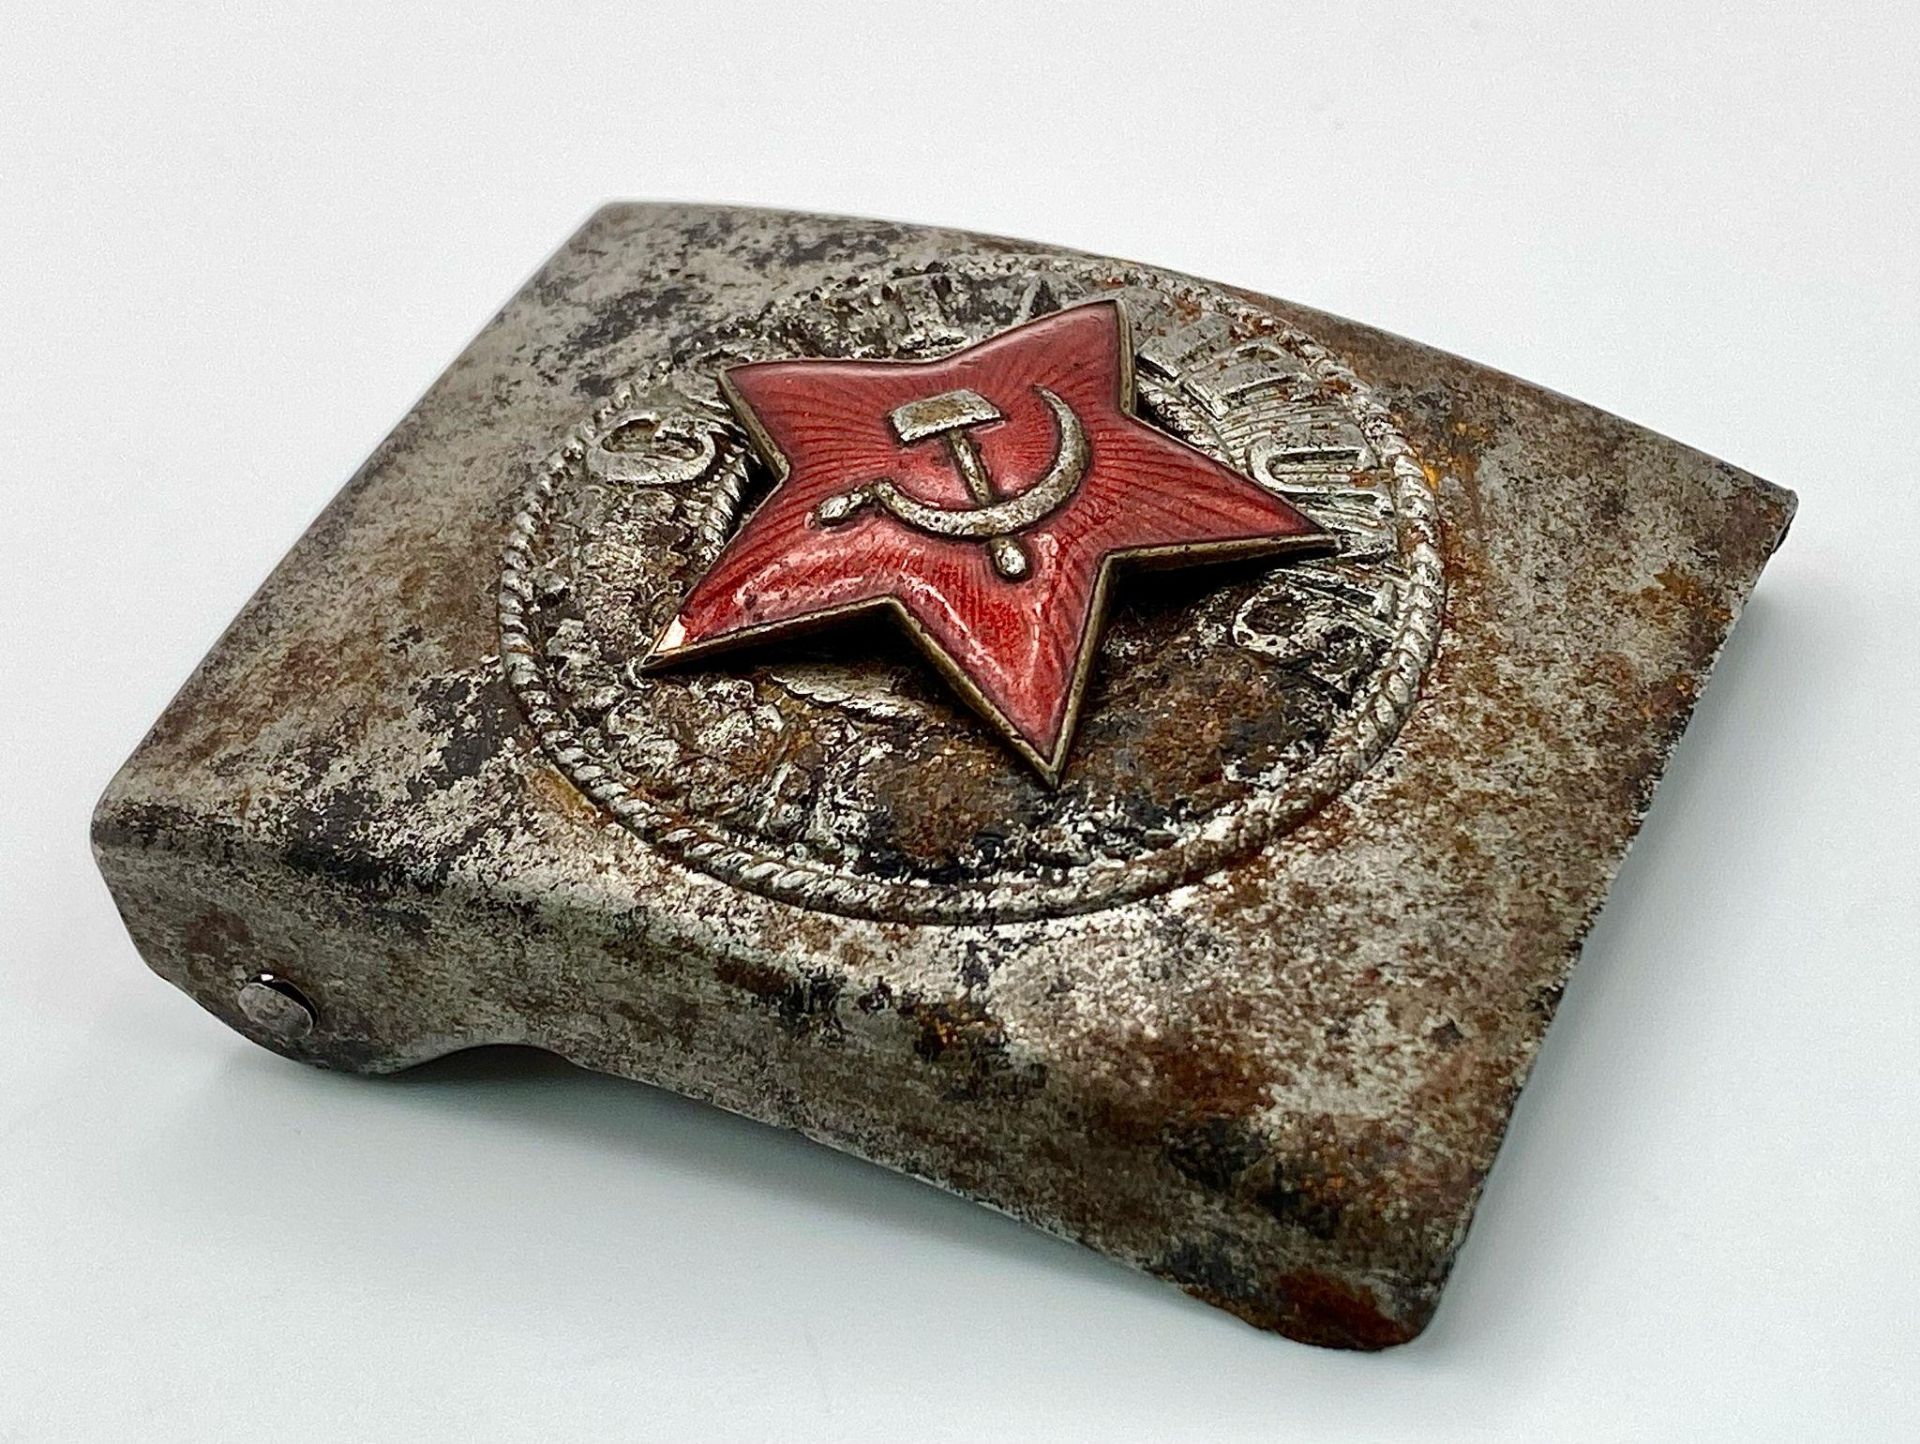 WW2 Soviet Russian Partisan Trophy, German Wehrmacht Buckle with the Red Star Hammer and Sickle - Image 2 of 3